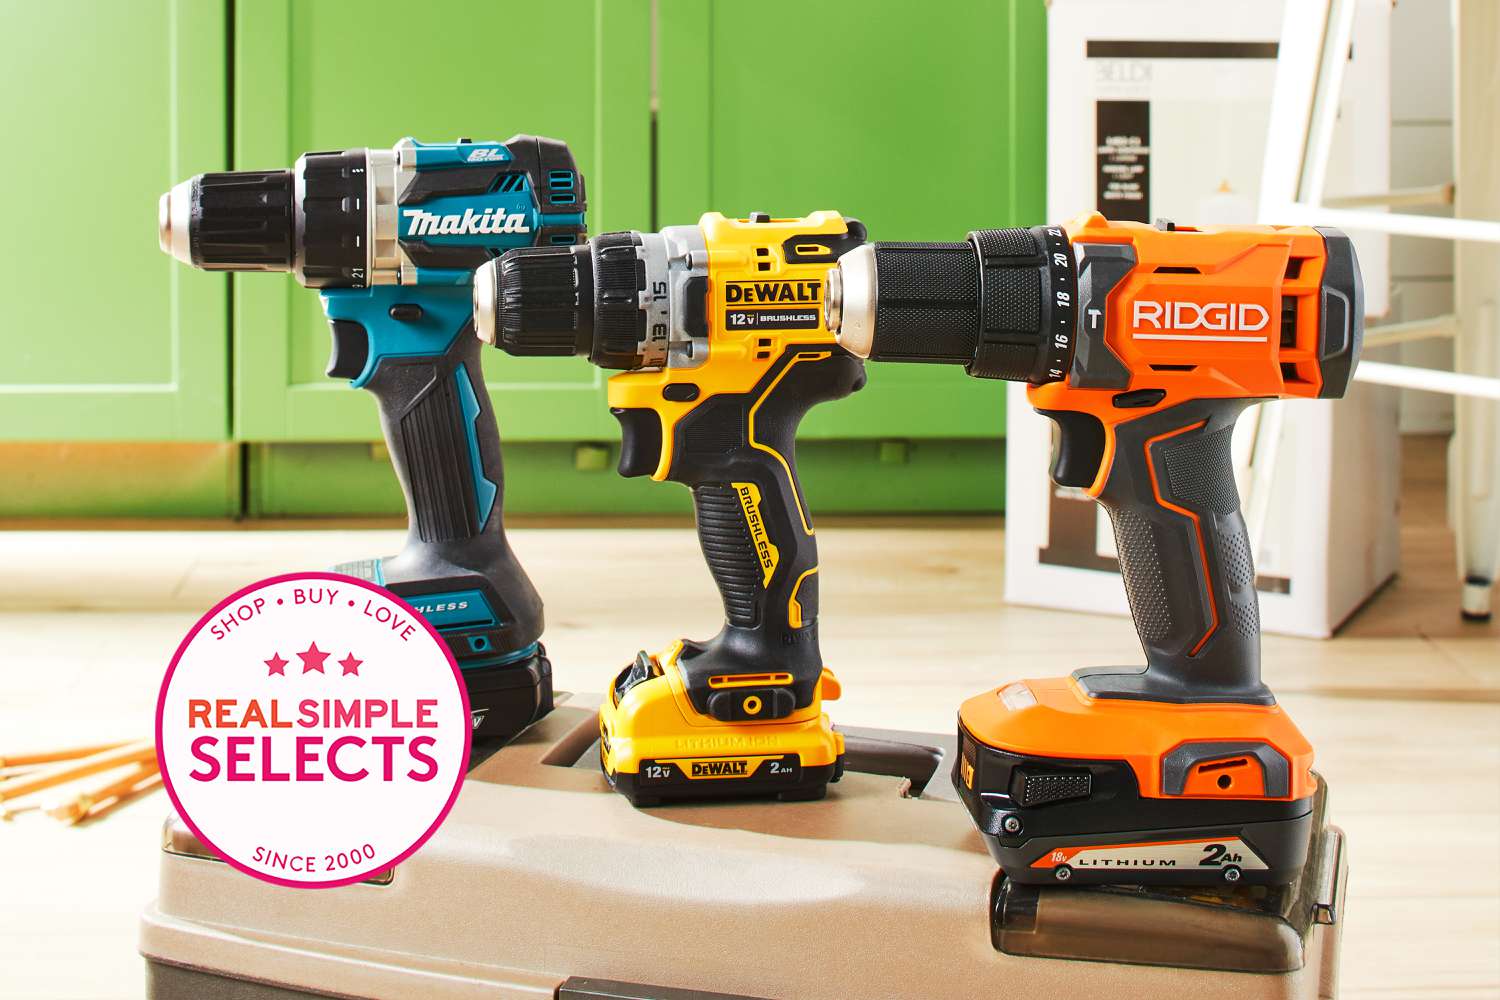 What are the Essential Accessories for a Cordless Power Tool Kit for Home Maintenance?